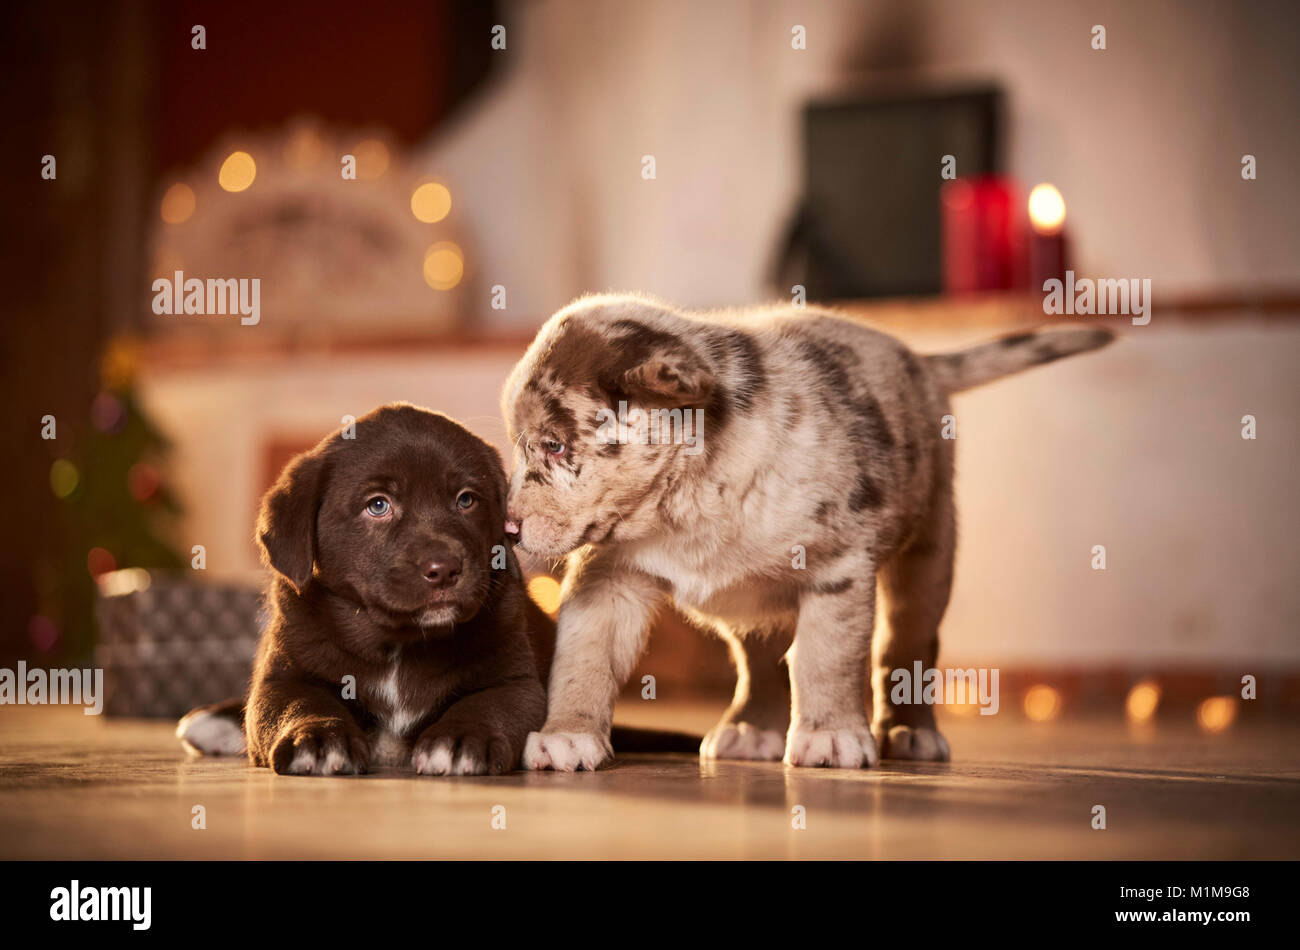 Mixed-breed dog. Two puppies in a room decorated for Christmas. Germany Stock Photo